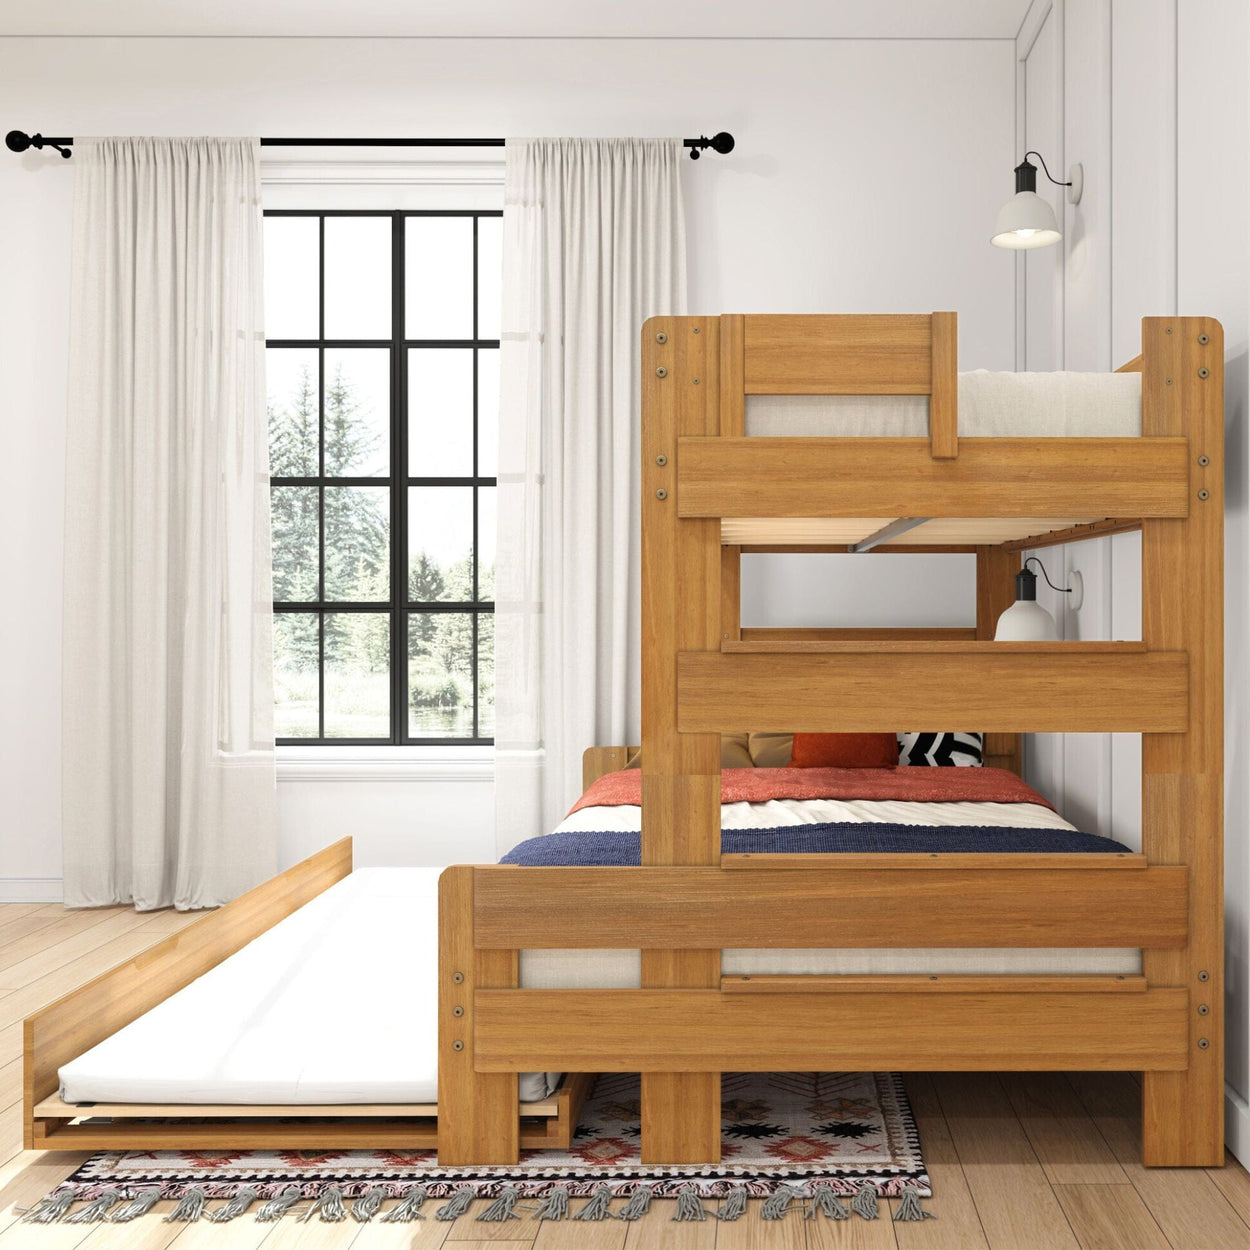 196231-187 : Bunk Beds Farmhouse Twin over Full Bunk Bed with Trundle, Pecan